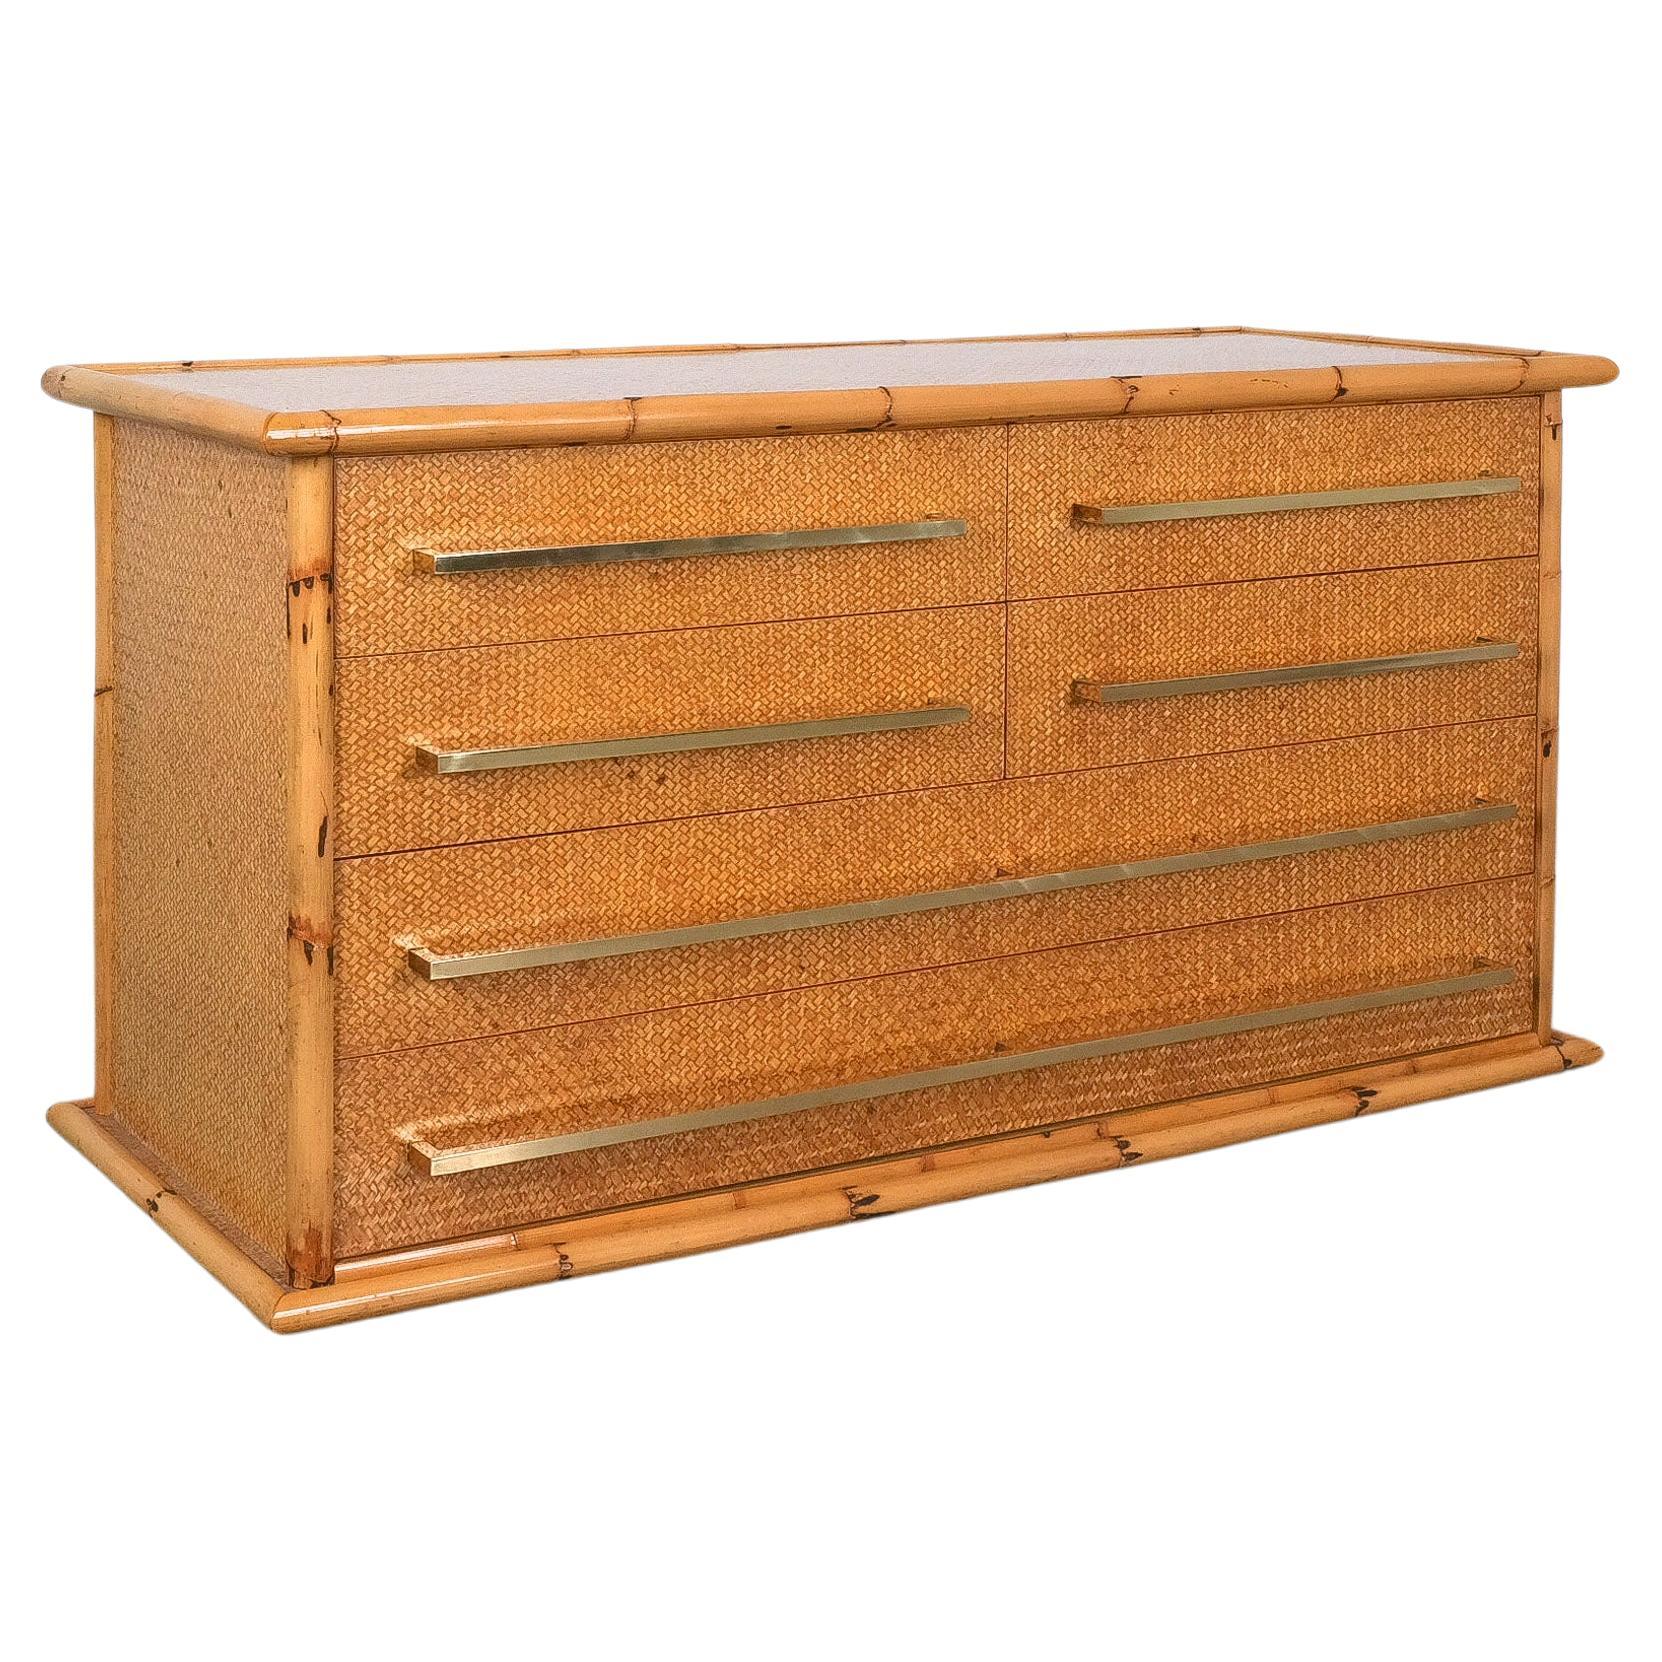 Bamboo Cane and Brass Commode Chest of Drawers by Vivai del Sud, Italy, 1975 For Sale 5